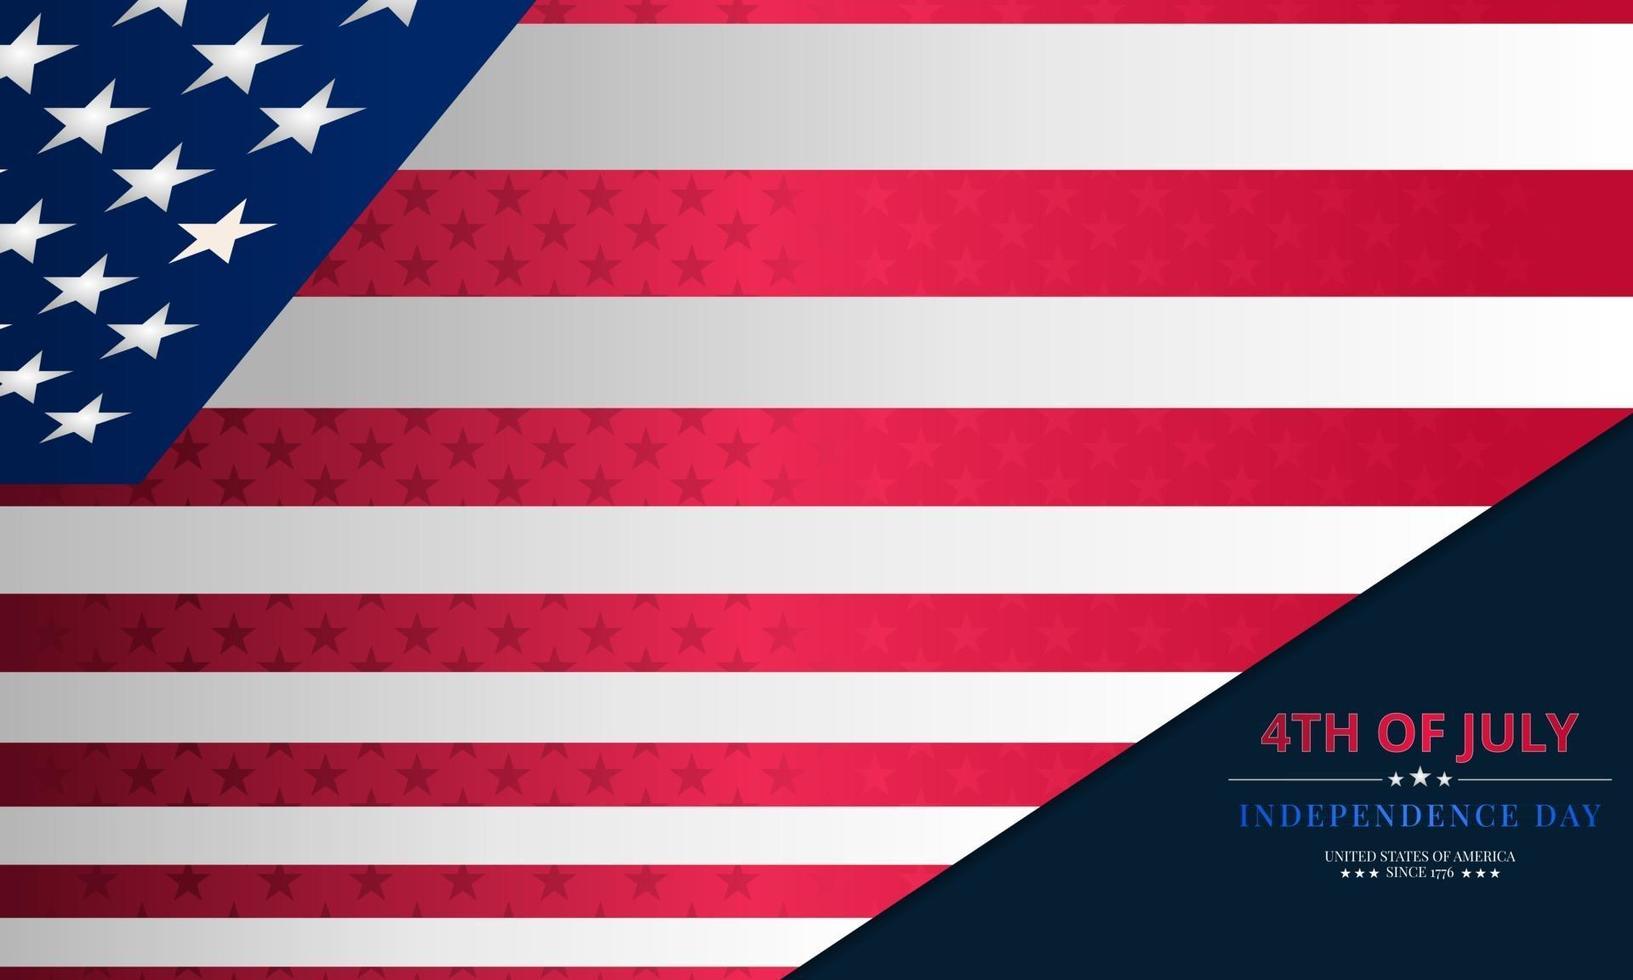 Happy 4th of July Independence day background  with american flag design vector